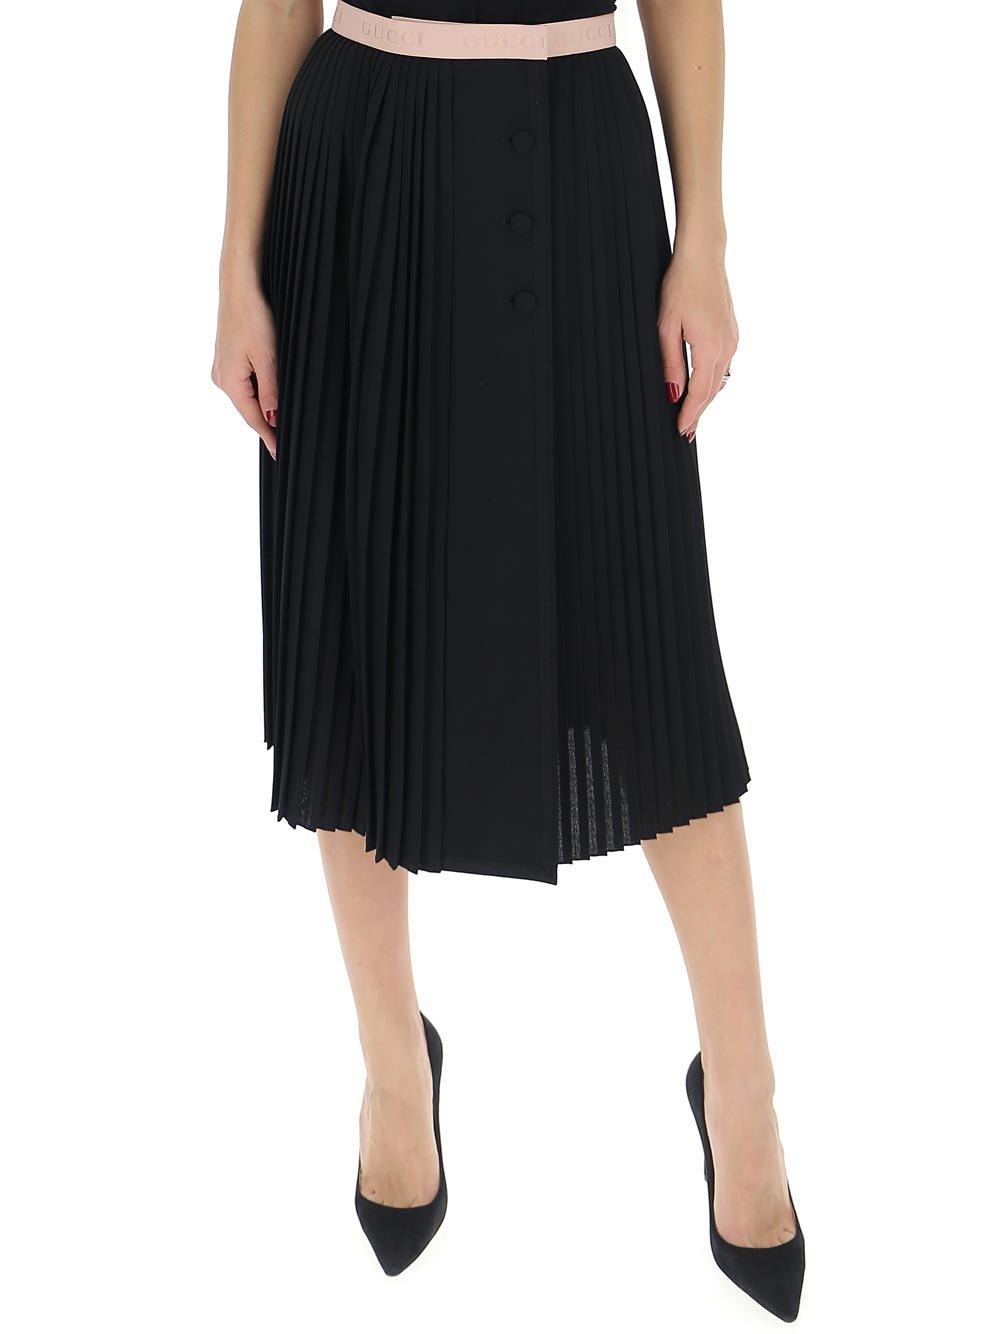 Gucci Contrasting Trim Pleated Skirt